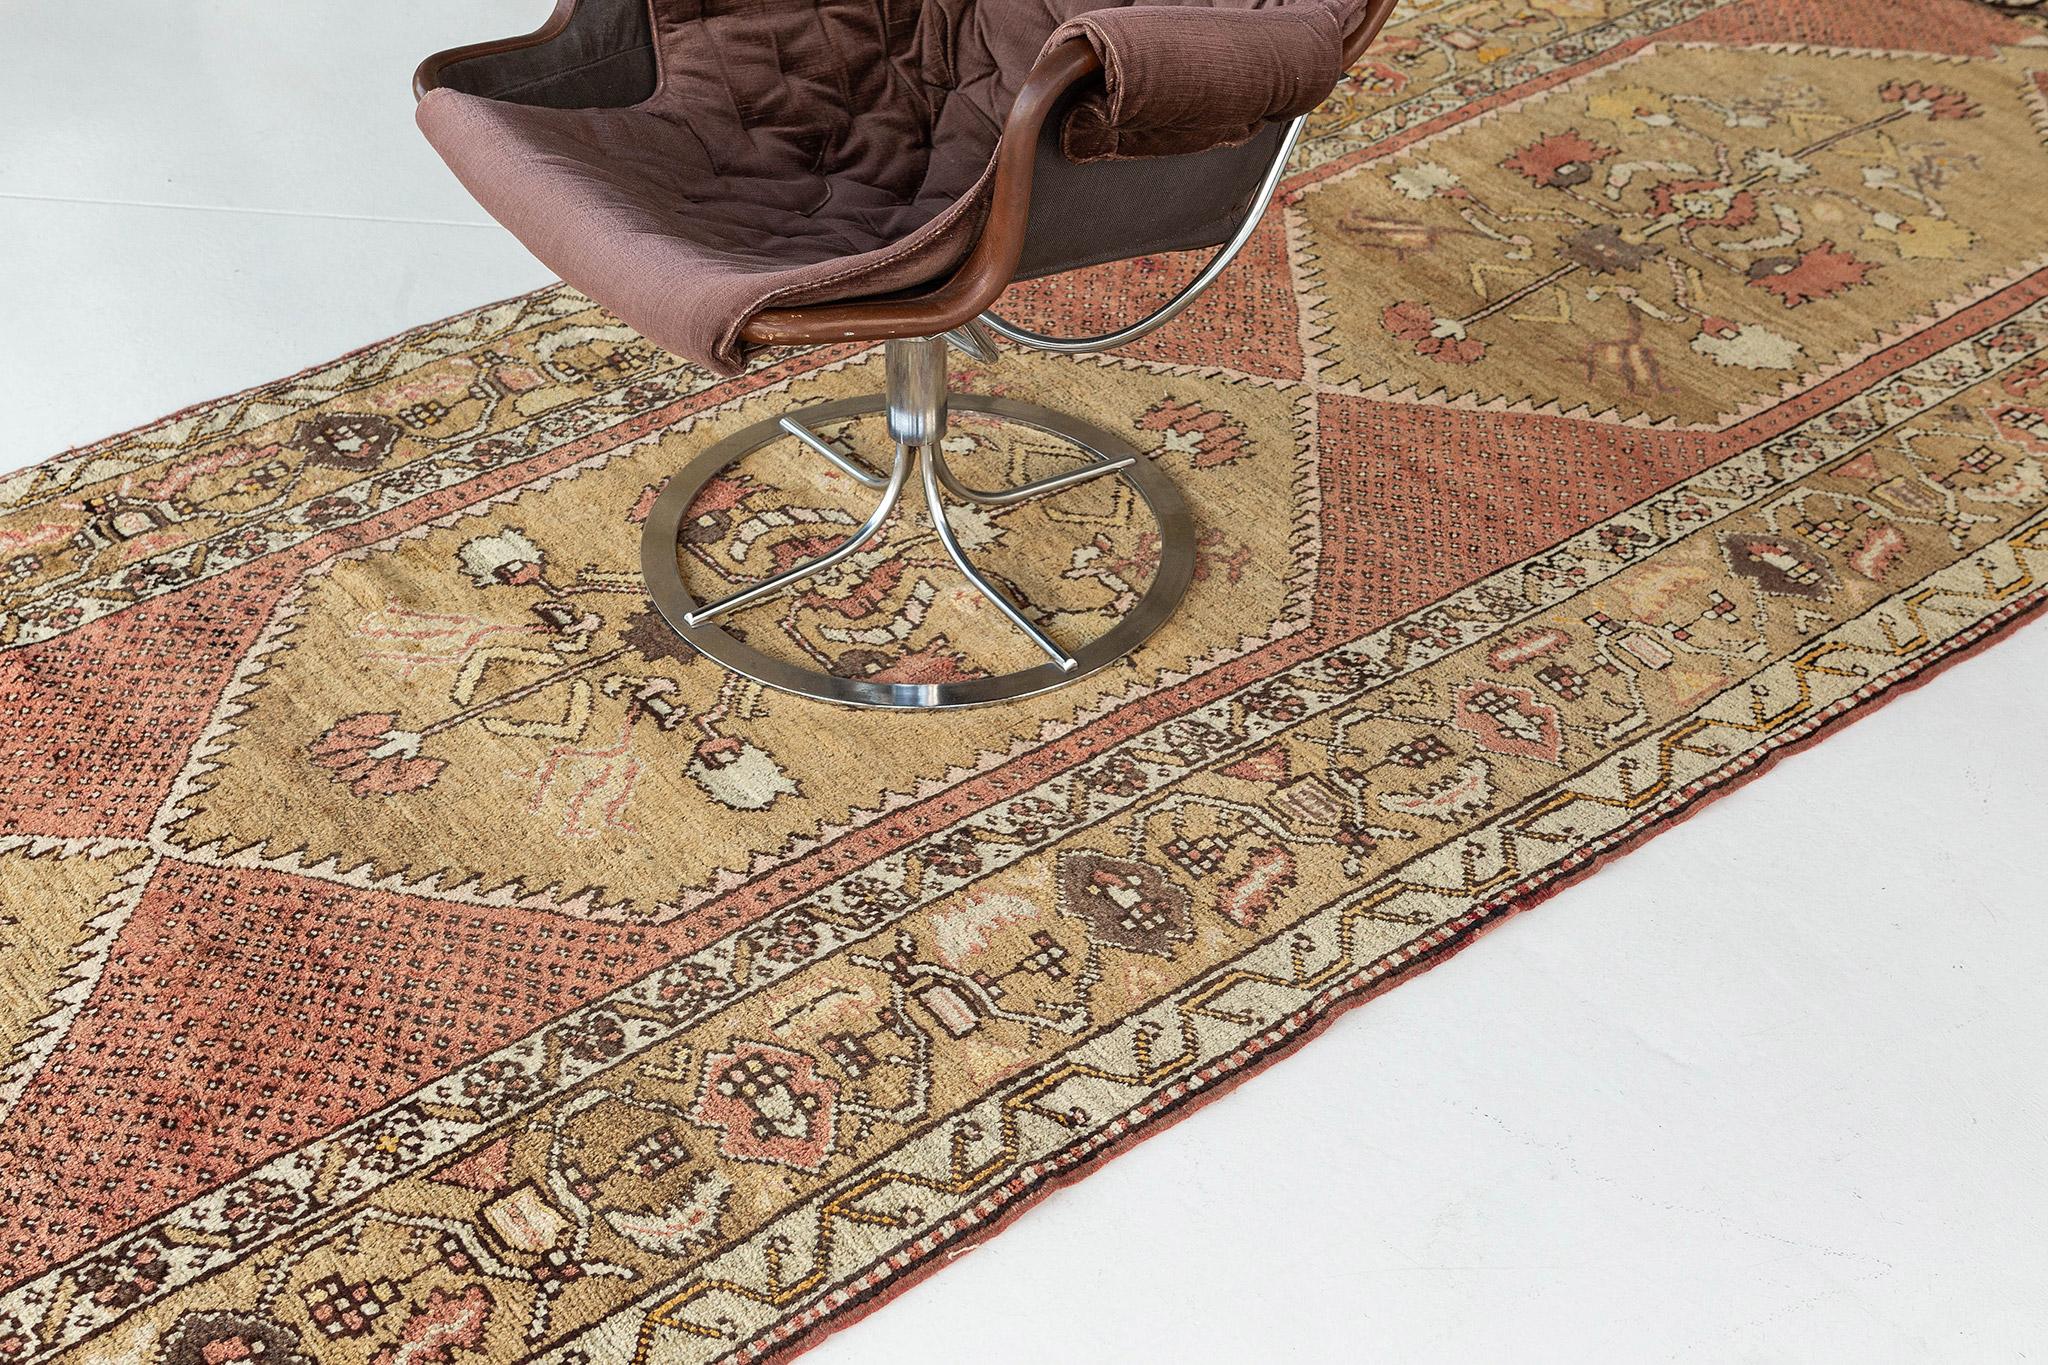 This Vintage Turkish Anatolian Runner features three distinctive lozenge cusped botanical medallions composed of palmettes, blossoms, stylized florals, leafy tendrils and thin angular vines dancing rhythmically. A stylized botanical meander border